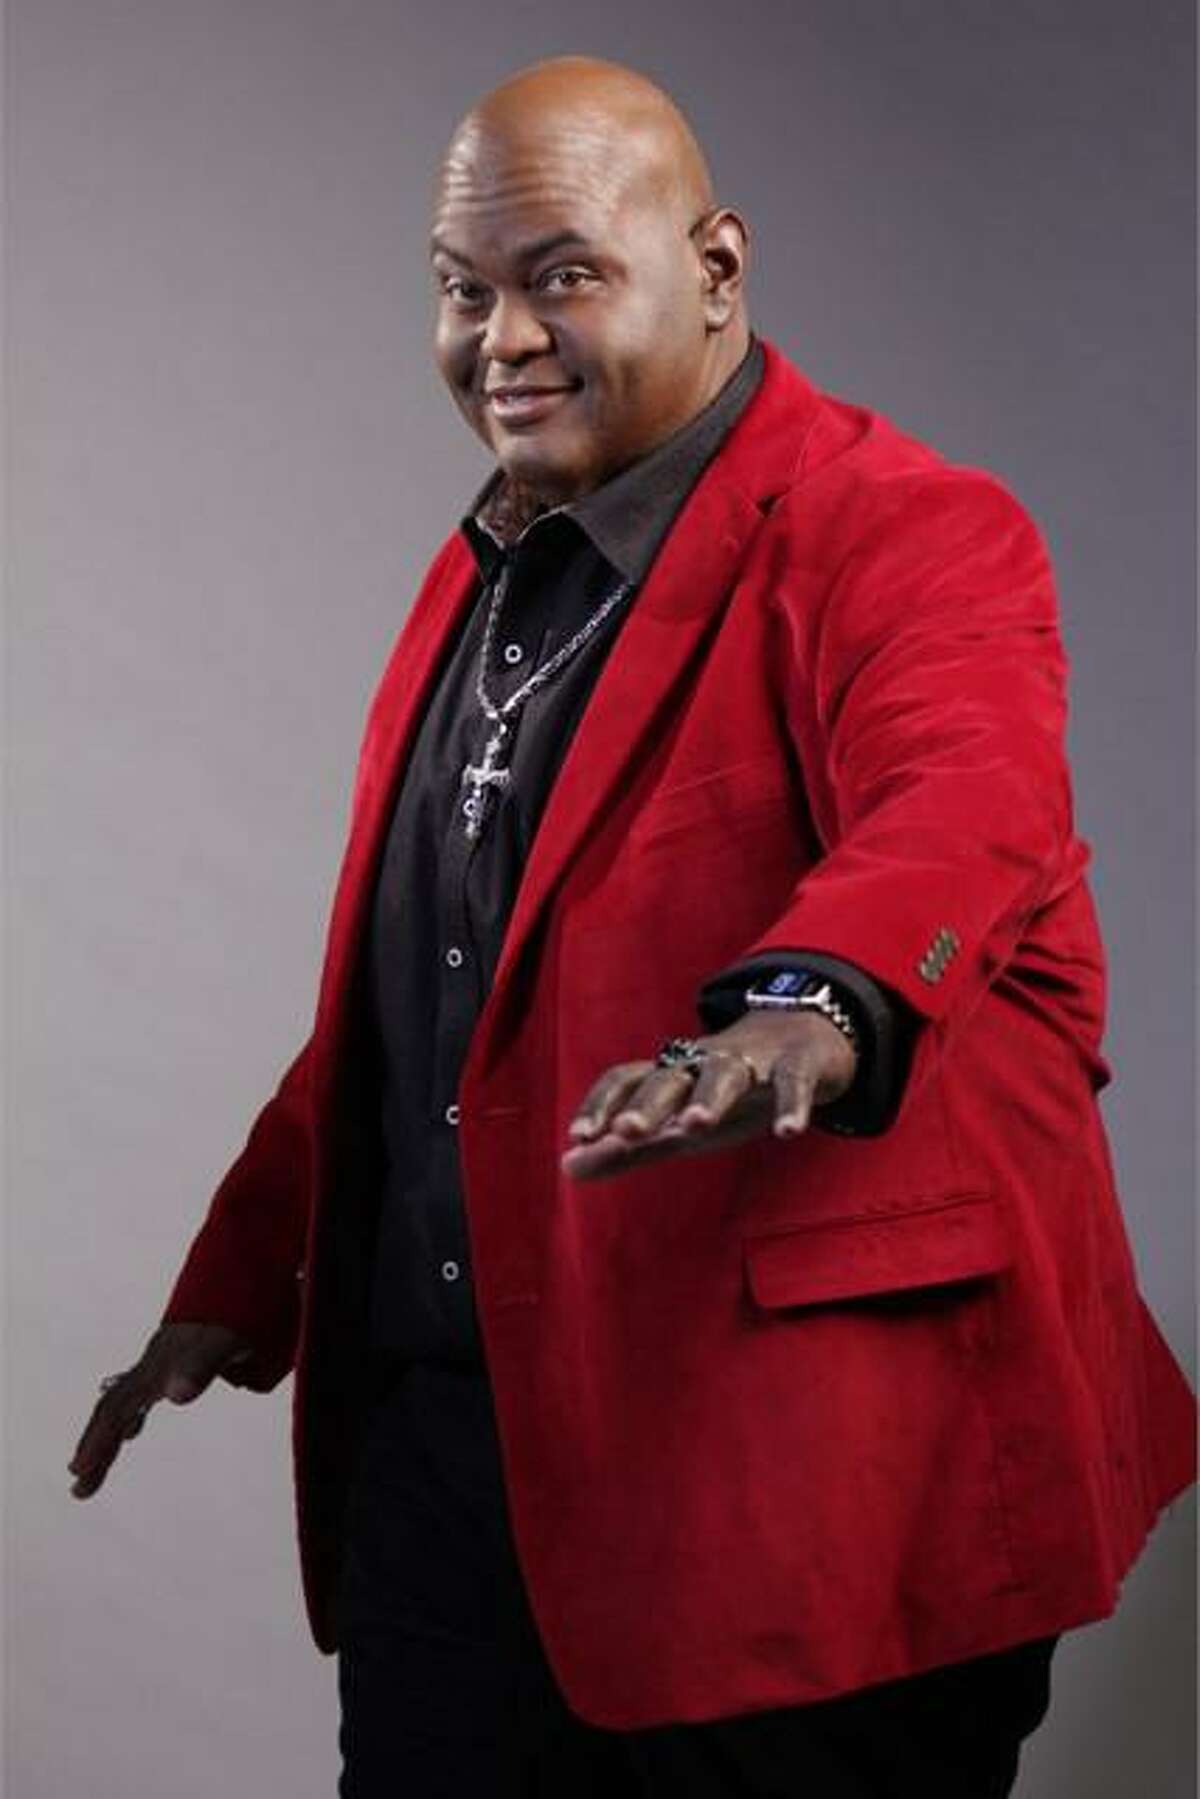 ‘Breaking Bad’ actor Lavell Crawford serves laughs at Stress Factory